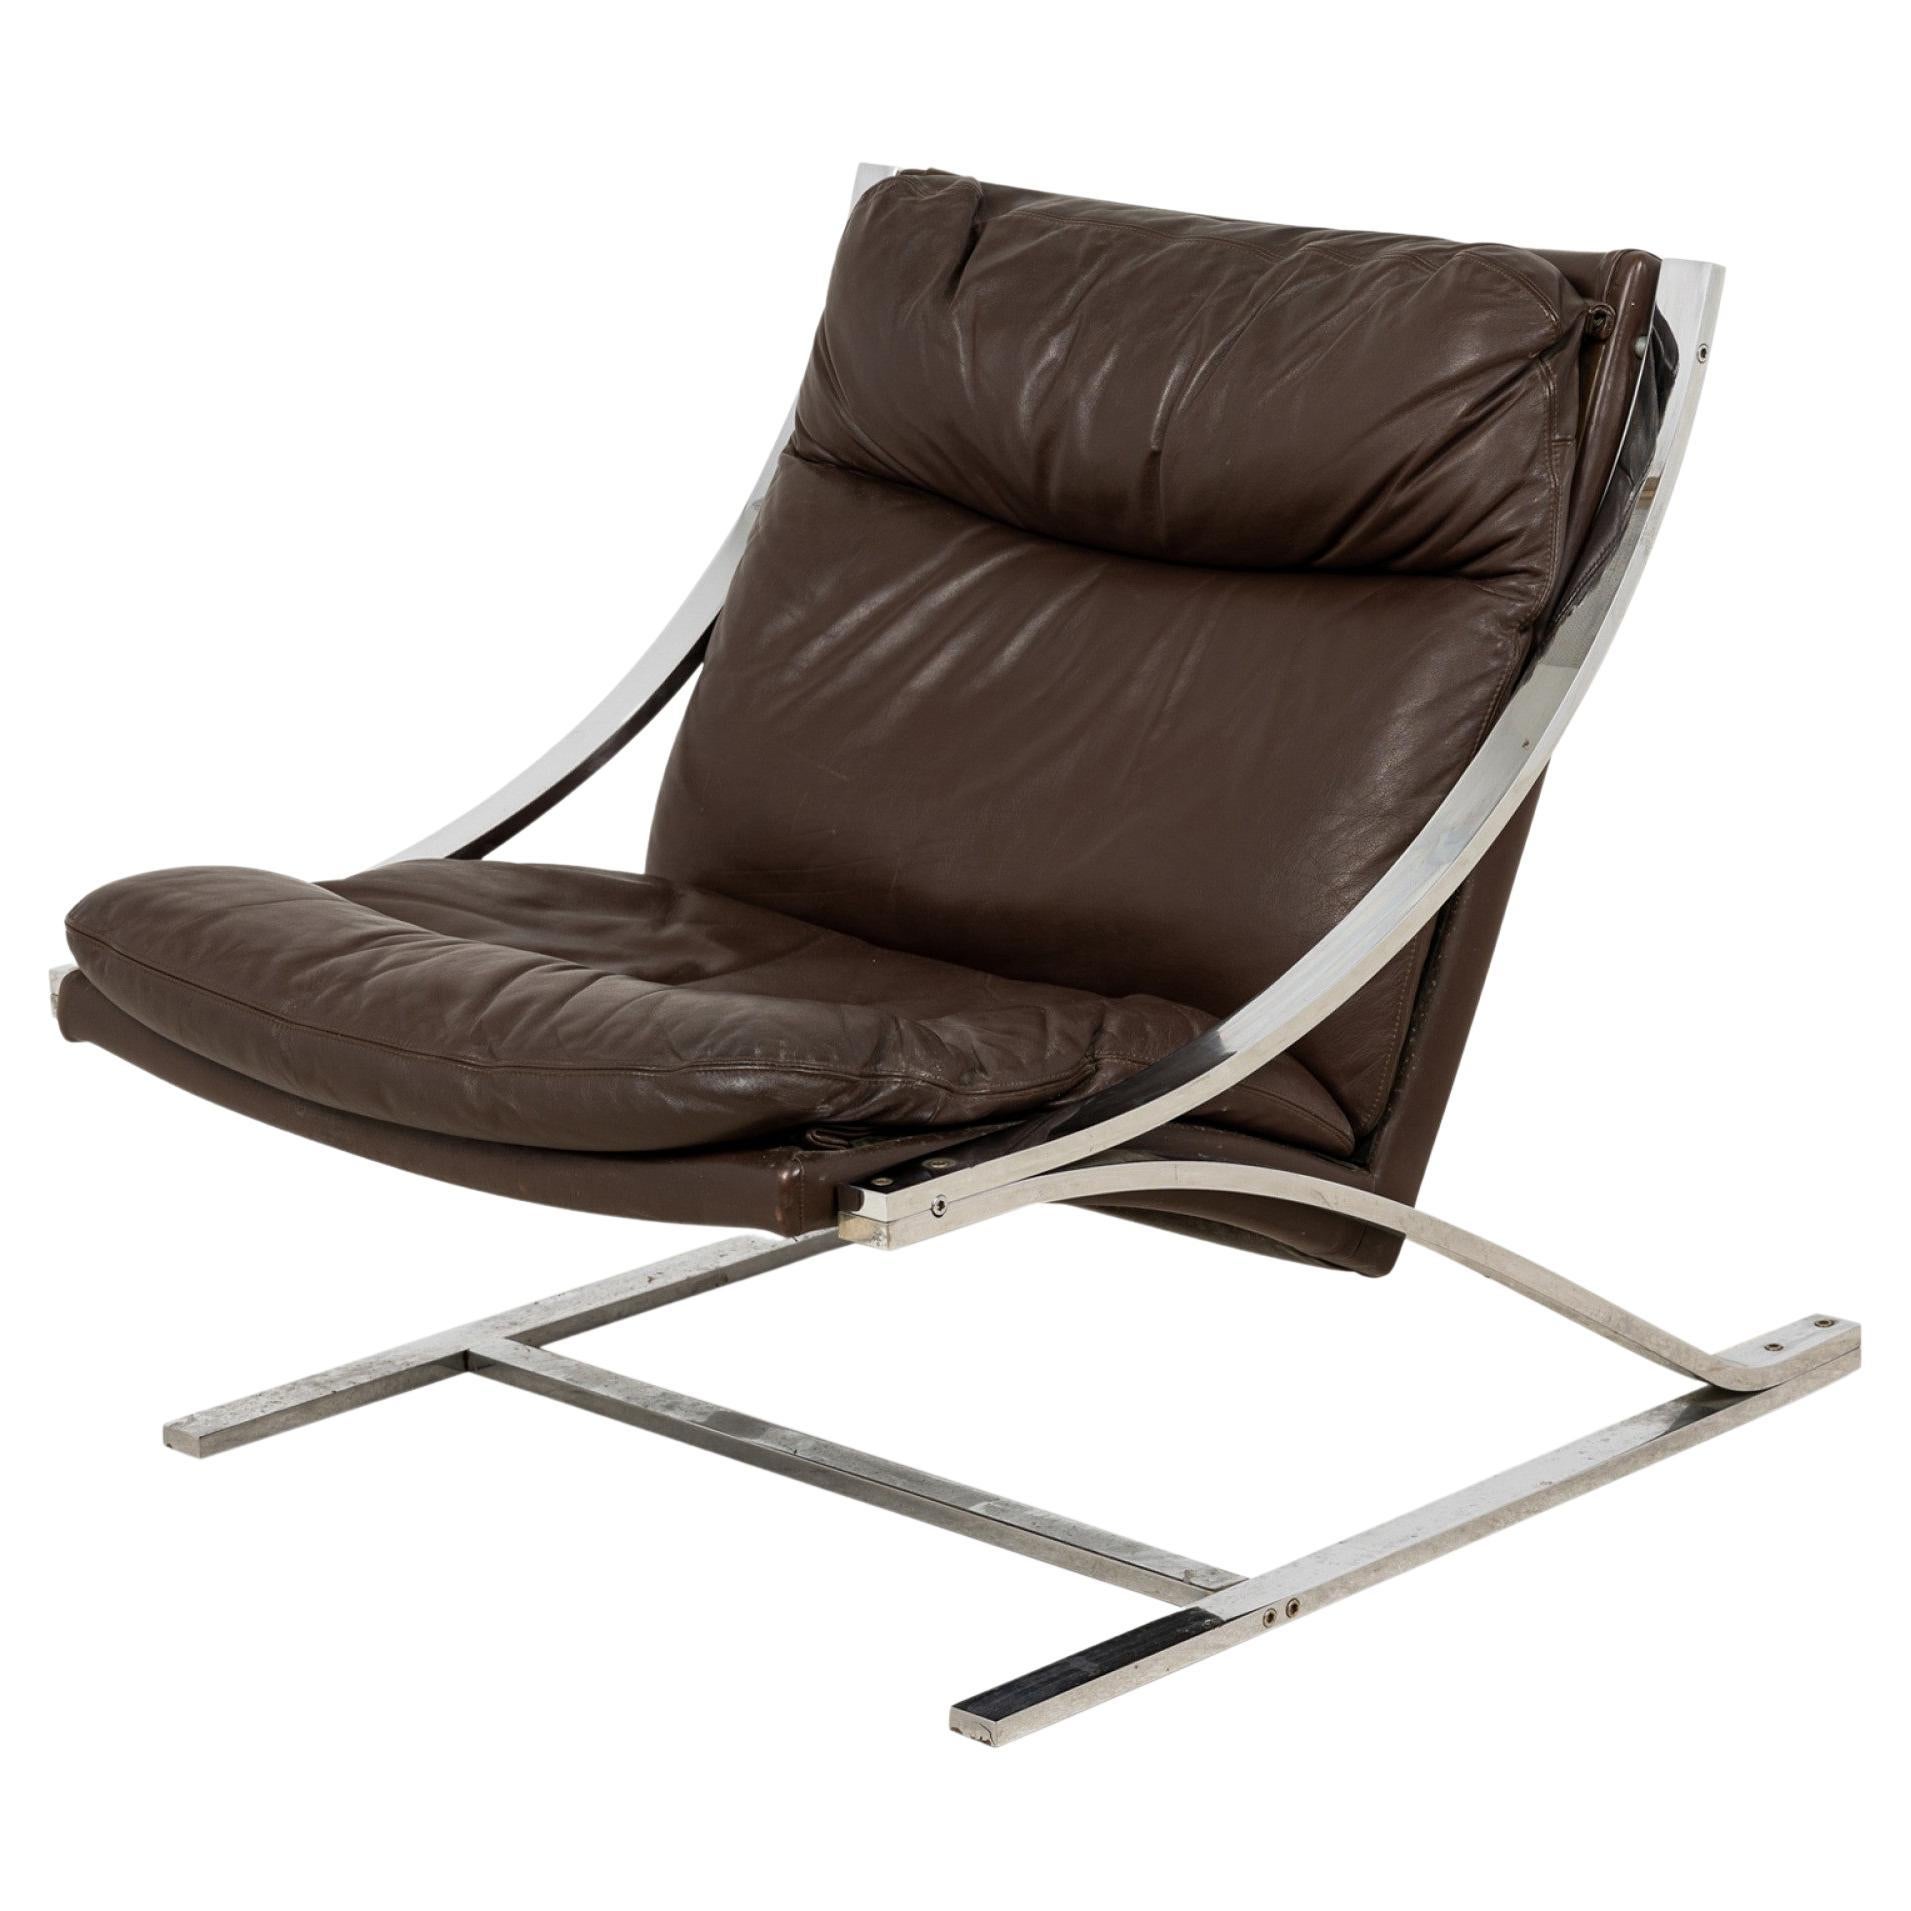 Paul Tuttle for Strassel 'Zeta' Brown Leather Cantilever Chrome Spring Lounge Ch